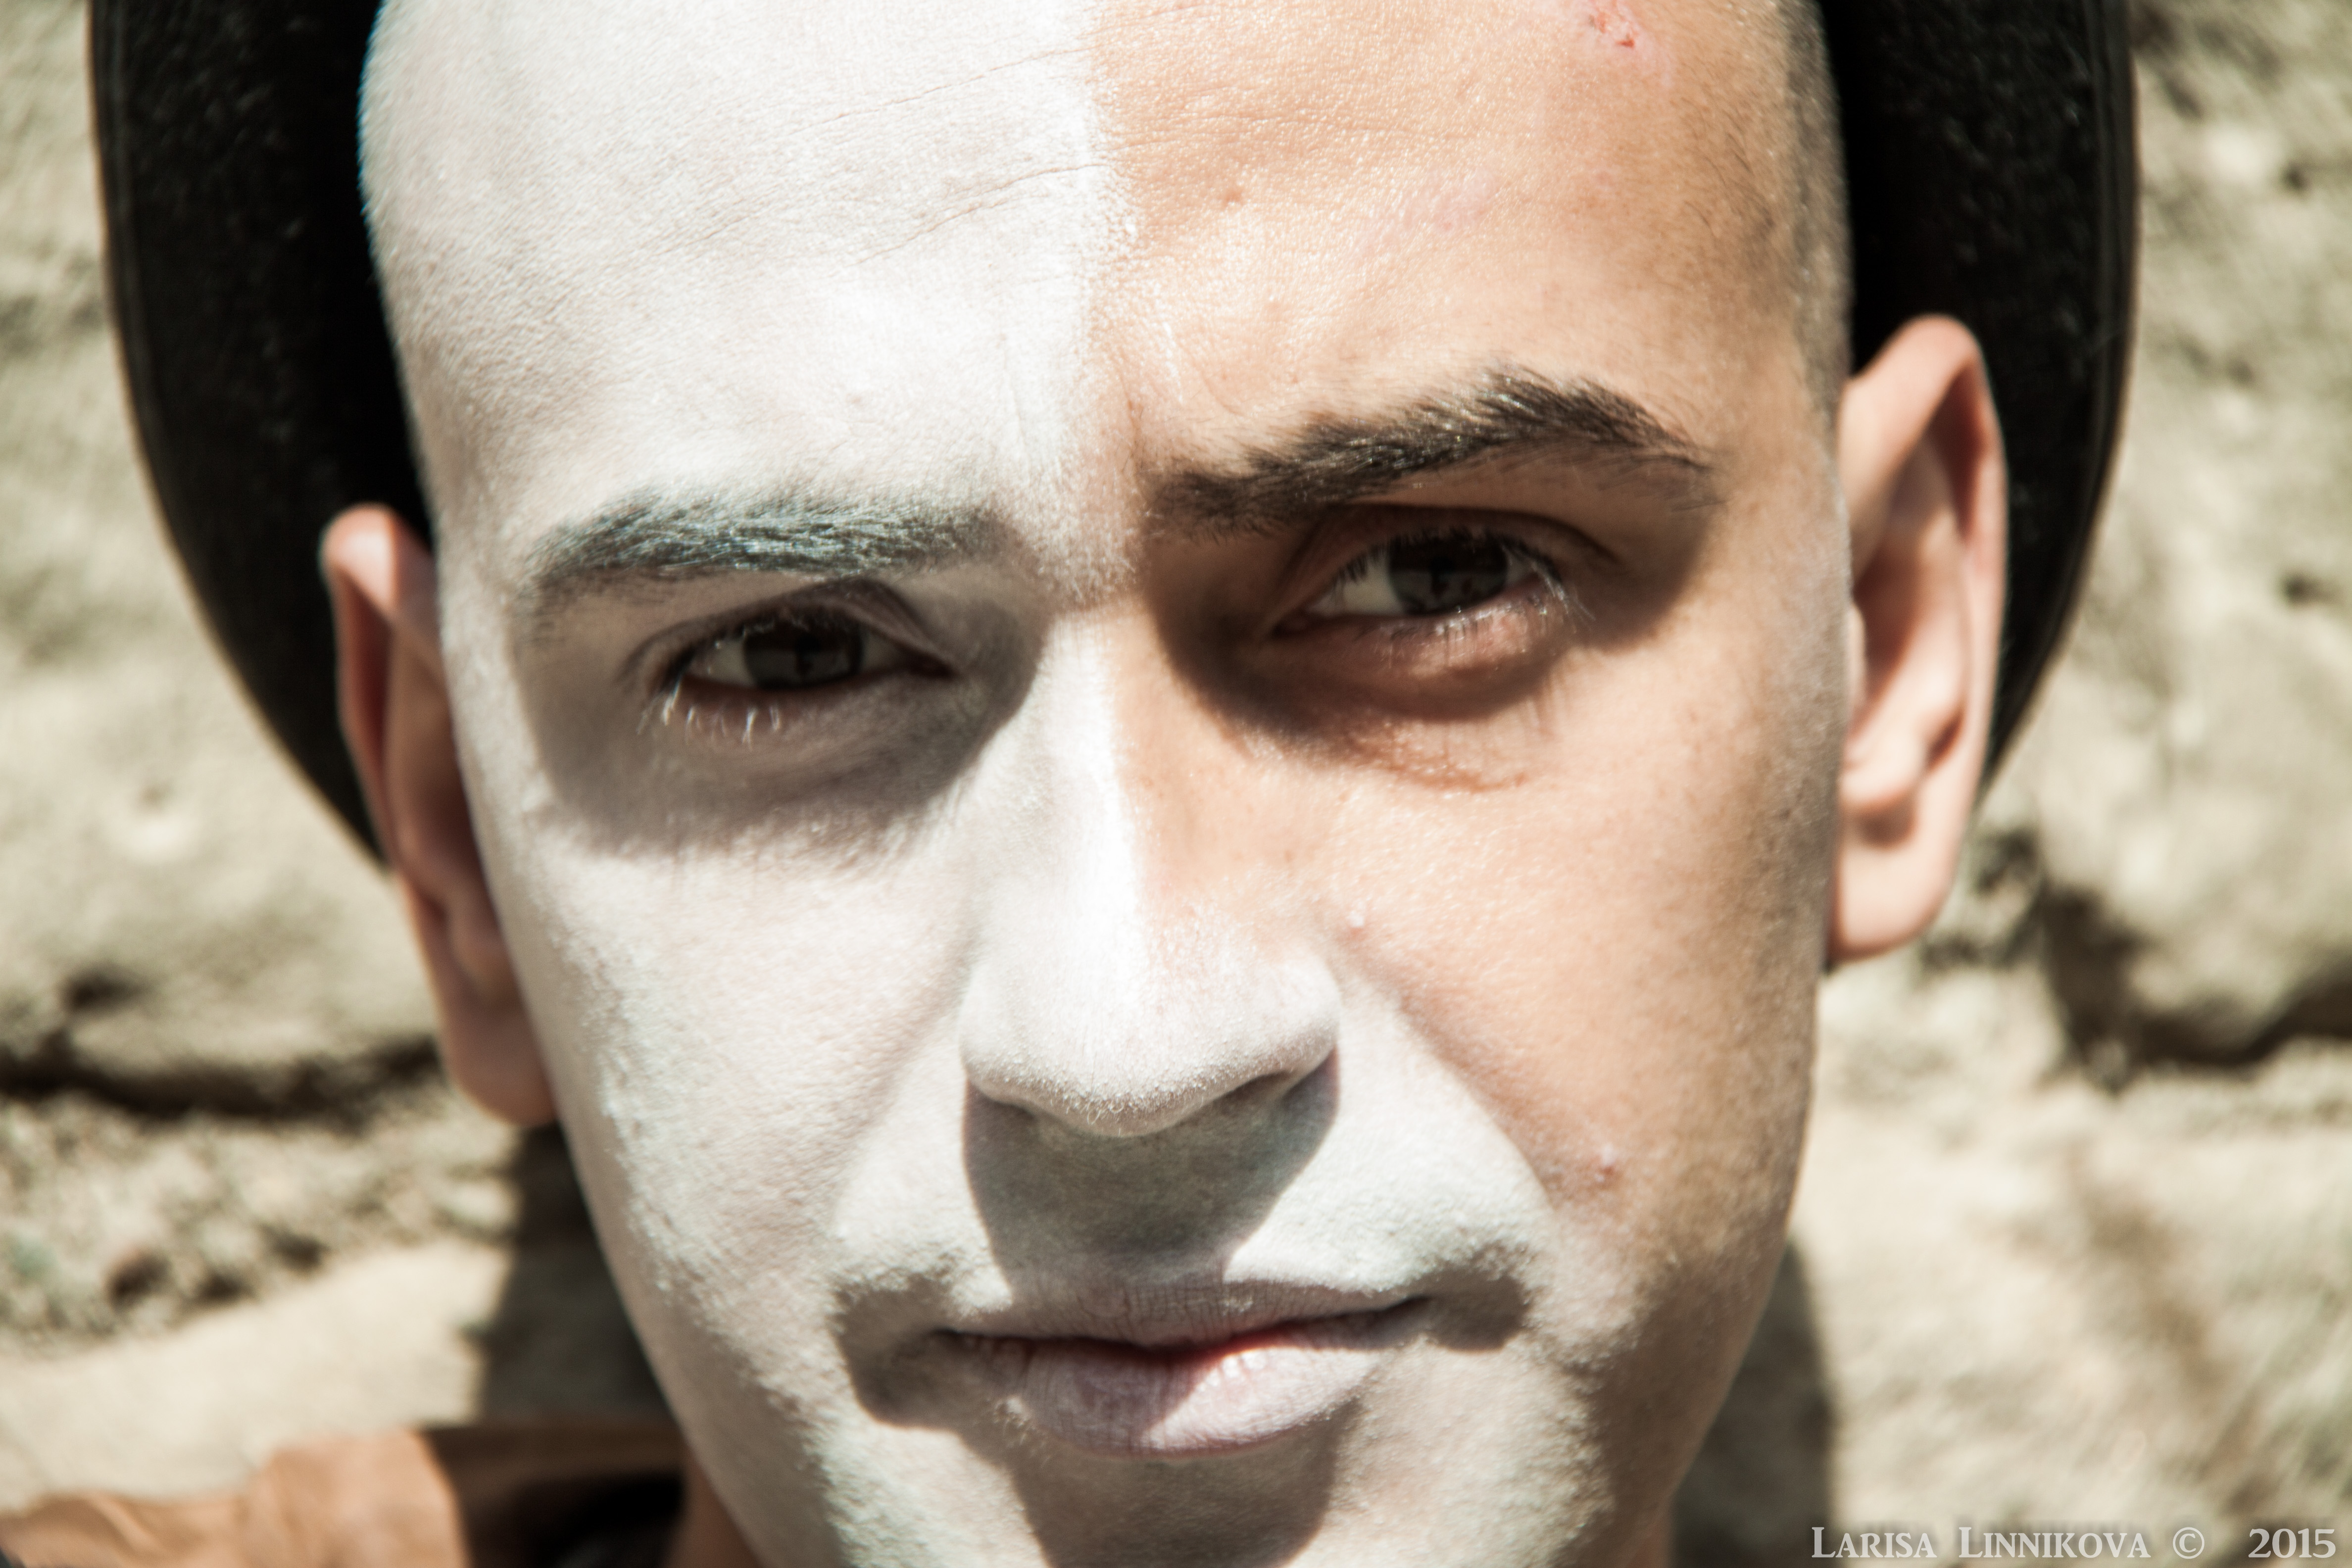 the mime close up headshot